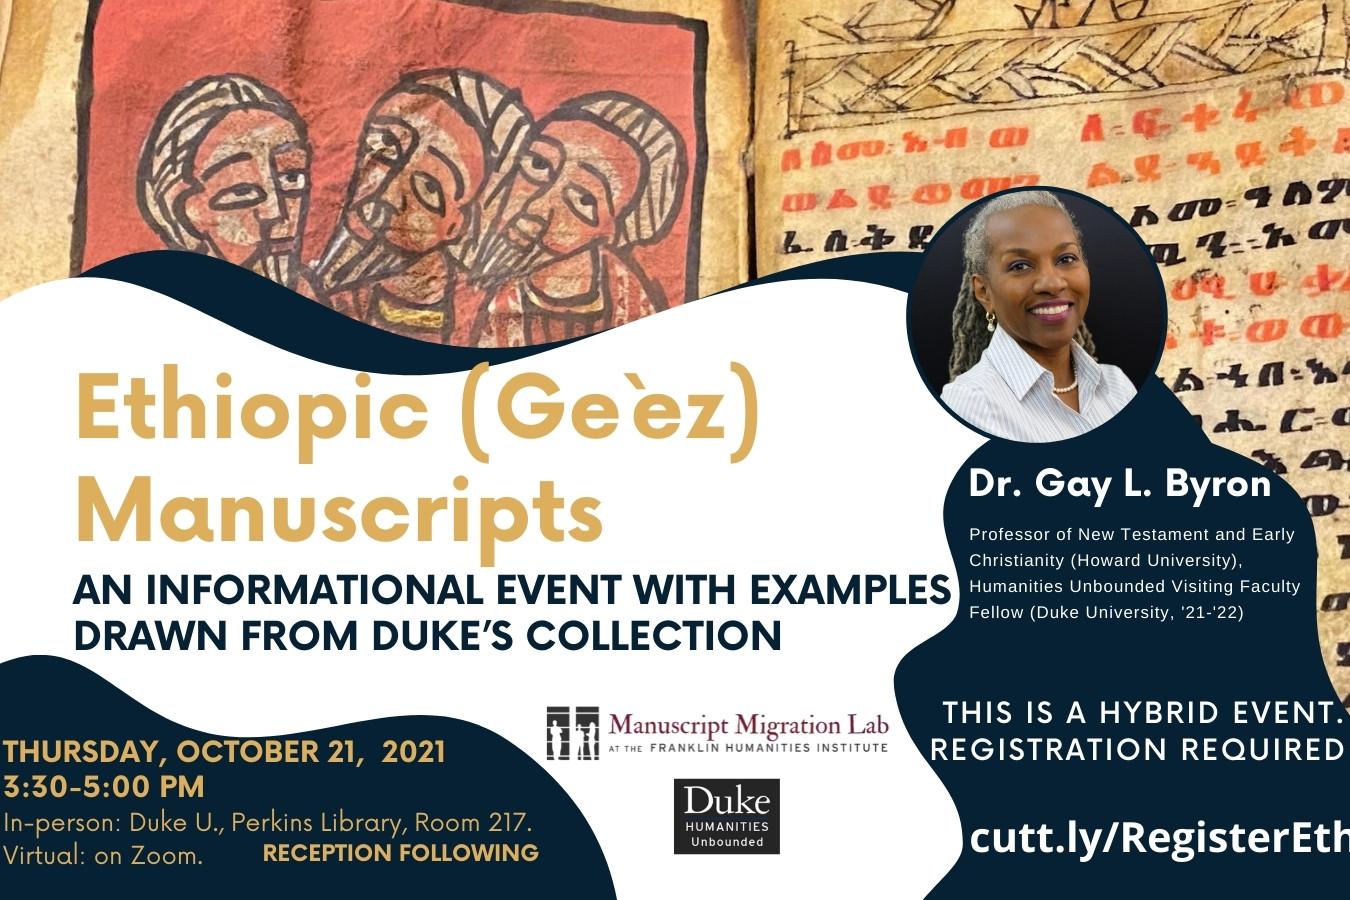 Ethiopic (Ge‘ez) Manuscripts: An Informational Event with Examples drawn from Duke’s Collection     Thursday, October 21, 2021 from 3:30 – 5:00 PM  In person at the Perkins Library, Room 217, or virtually by Zoom. Register here: https://cutt.ly/RegisterEthiopic